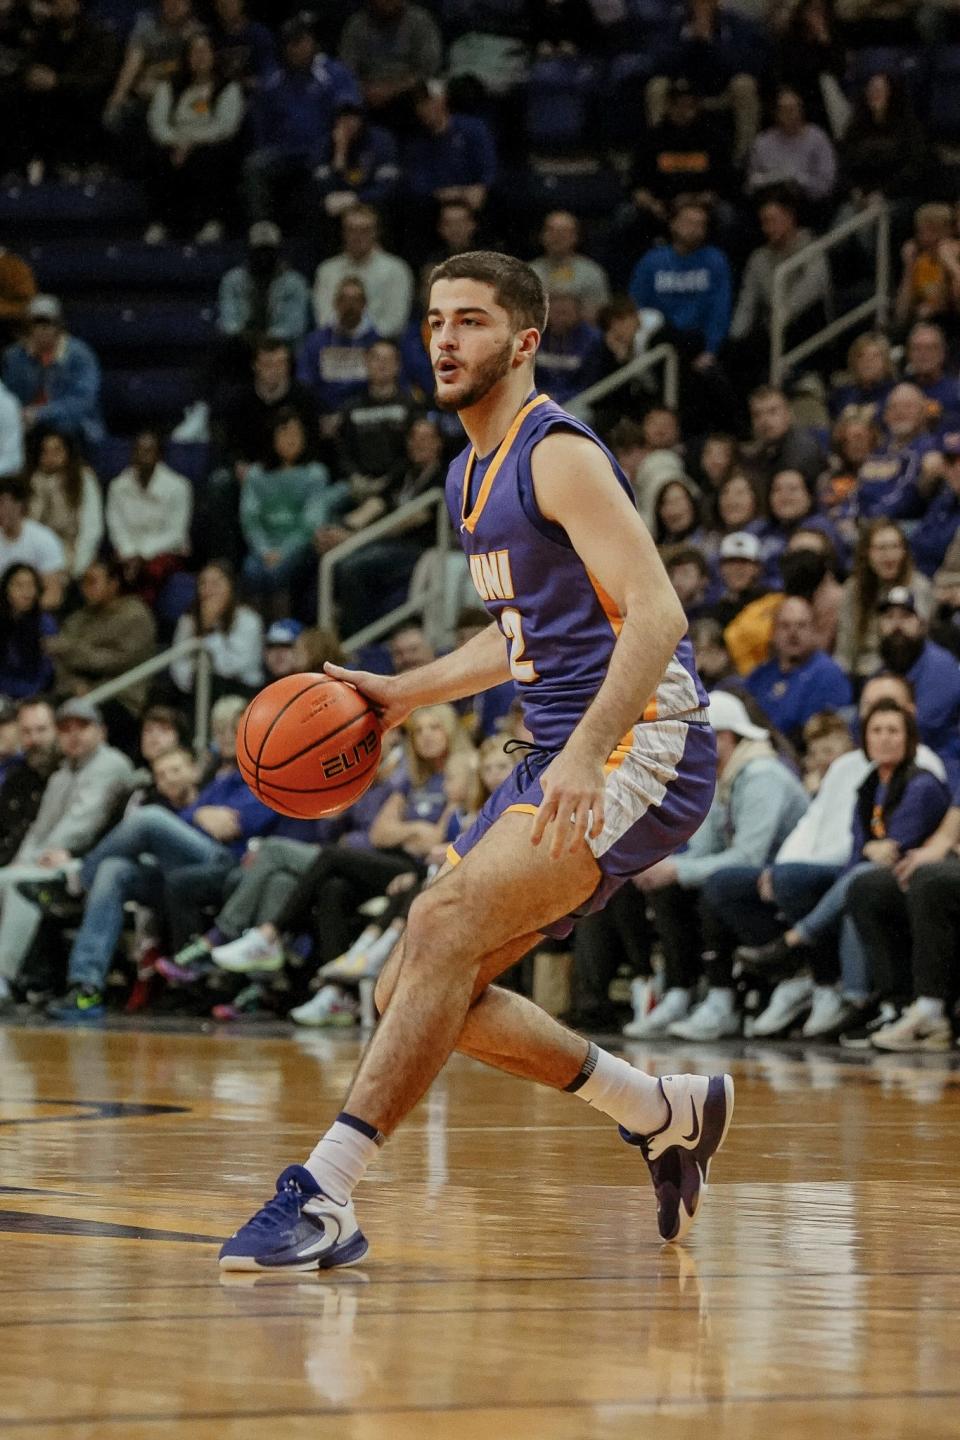 Ege Peksari dribbles the ball during a UNI basketball game. The Panthers' freshman wished he could do more to help in the wake of the earthquakes in Turkey.